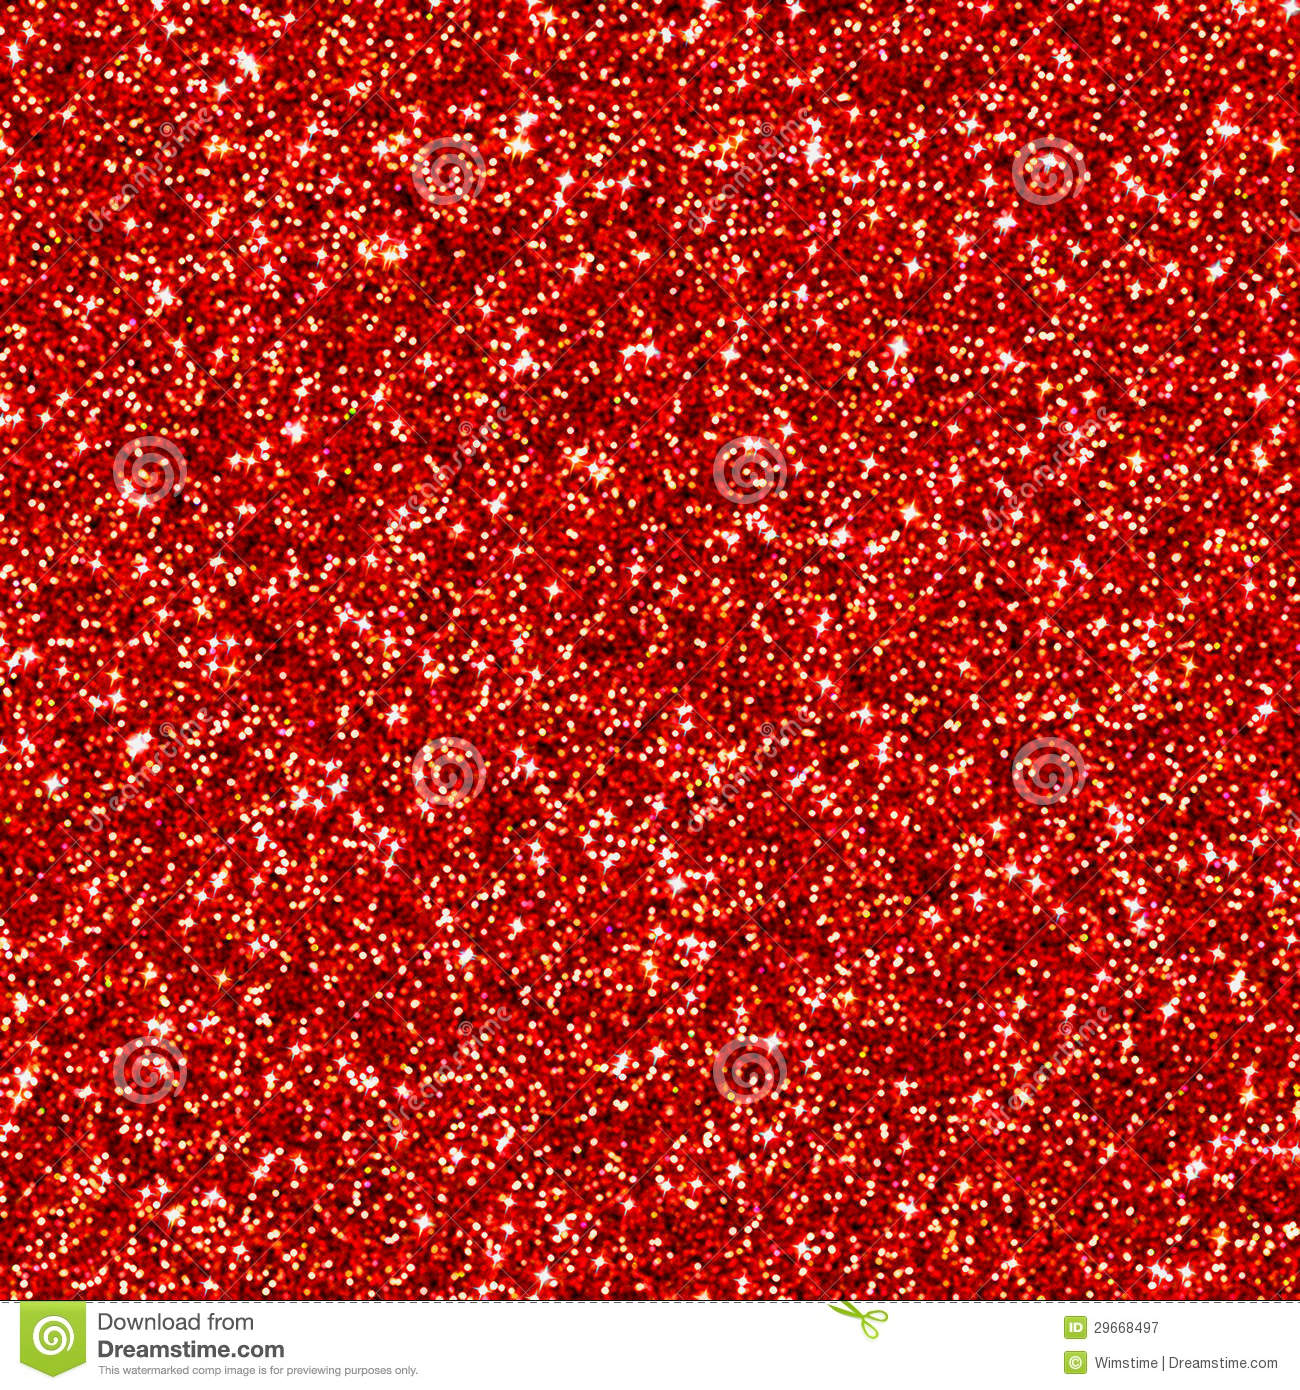 Red Glitter Royalty Free Stock Photography   Image  29668497